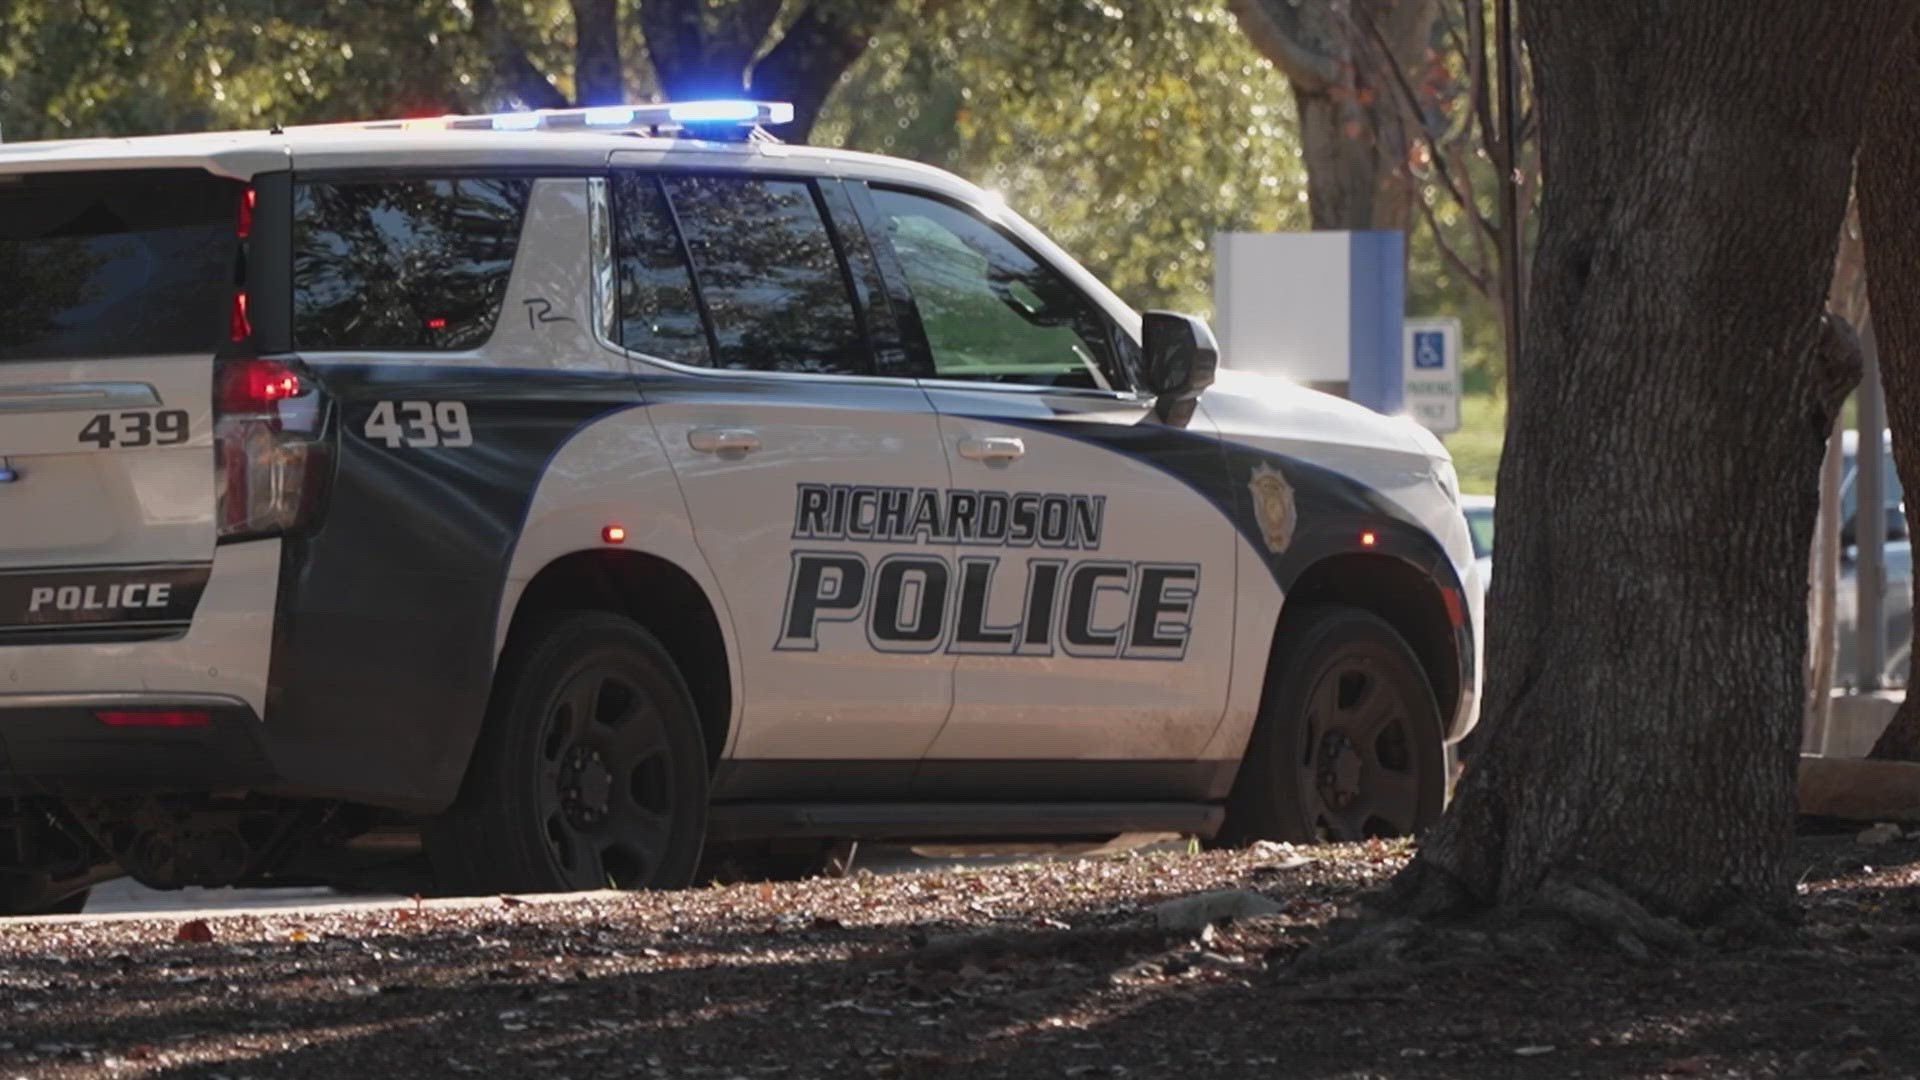 Richardson police posted on social media that they were called to assist the medical campus' police department "with a patient experiencing a mental health crisis."